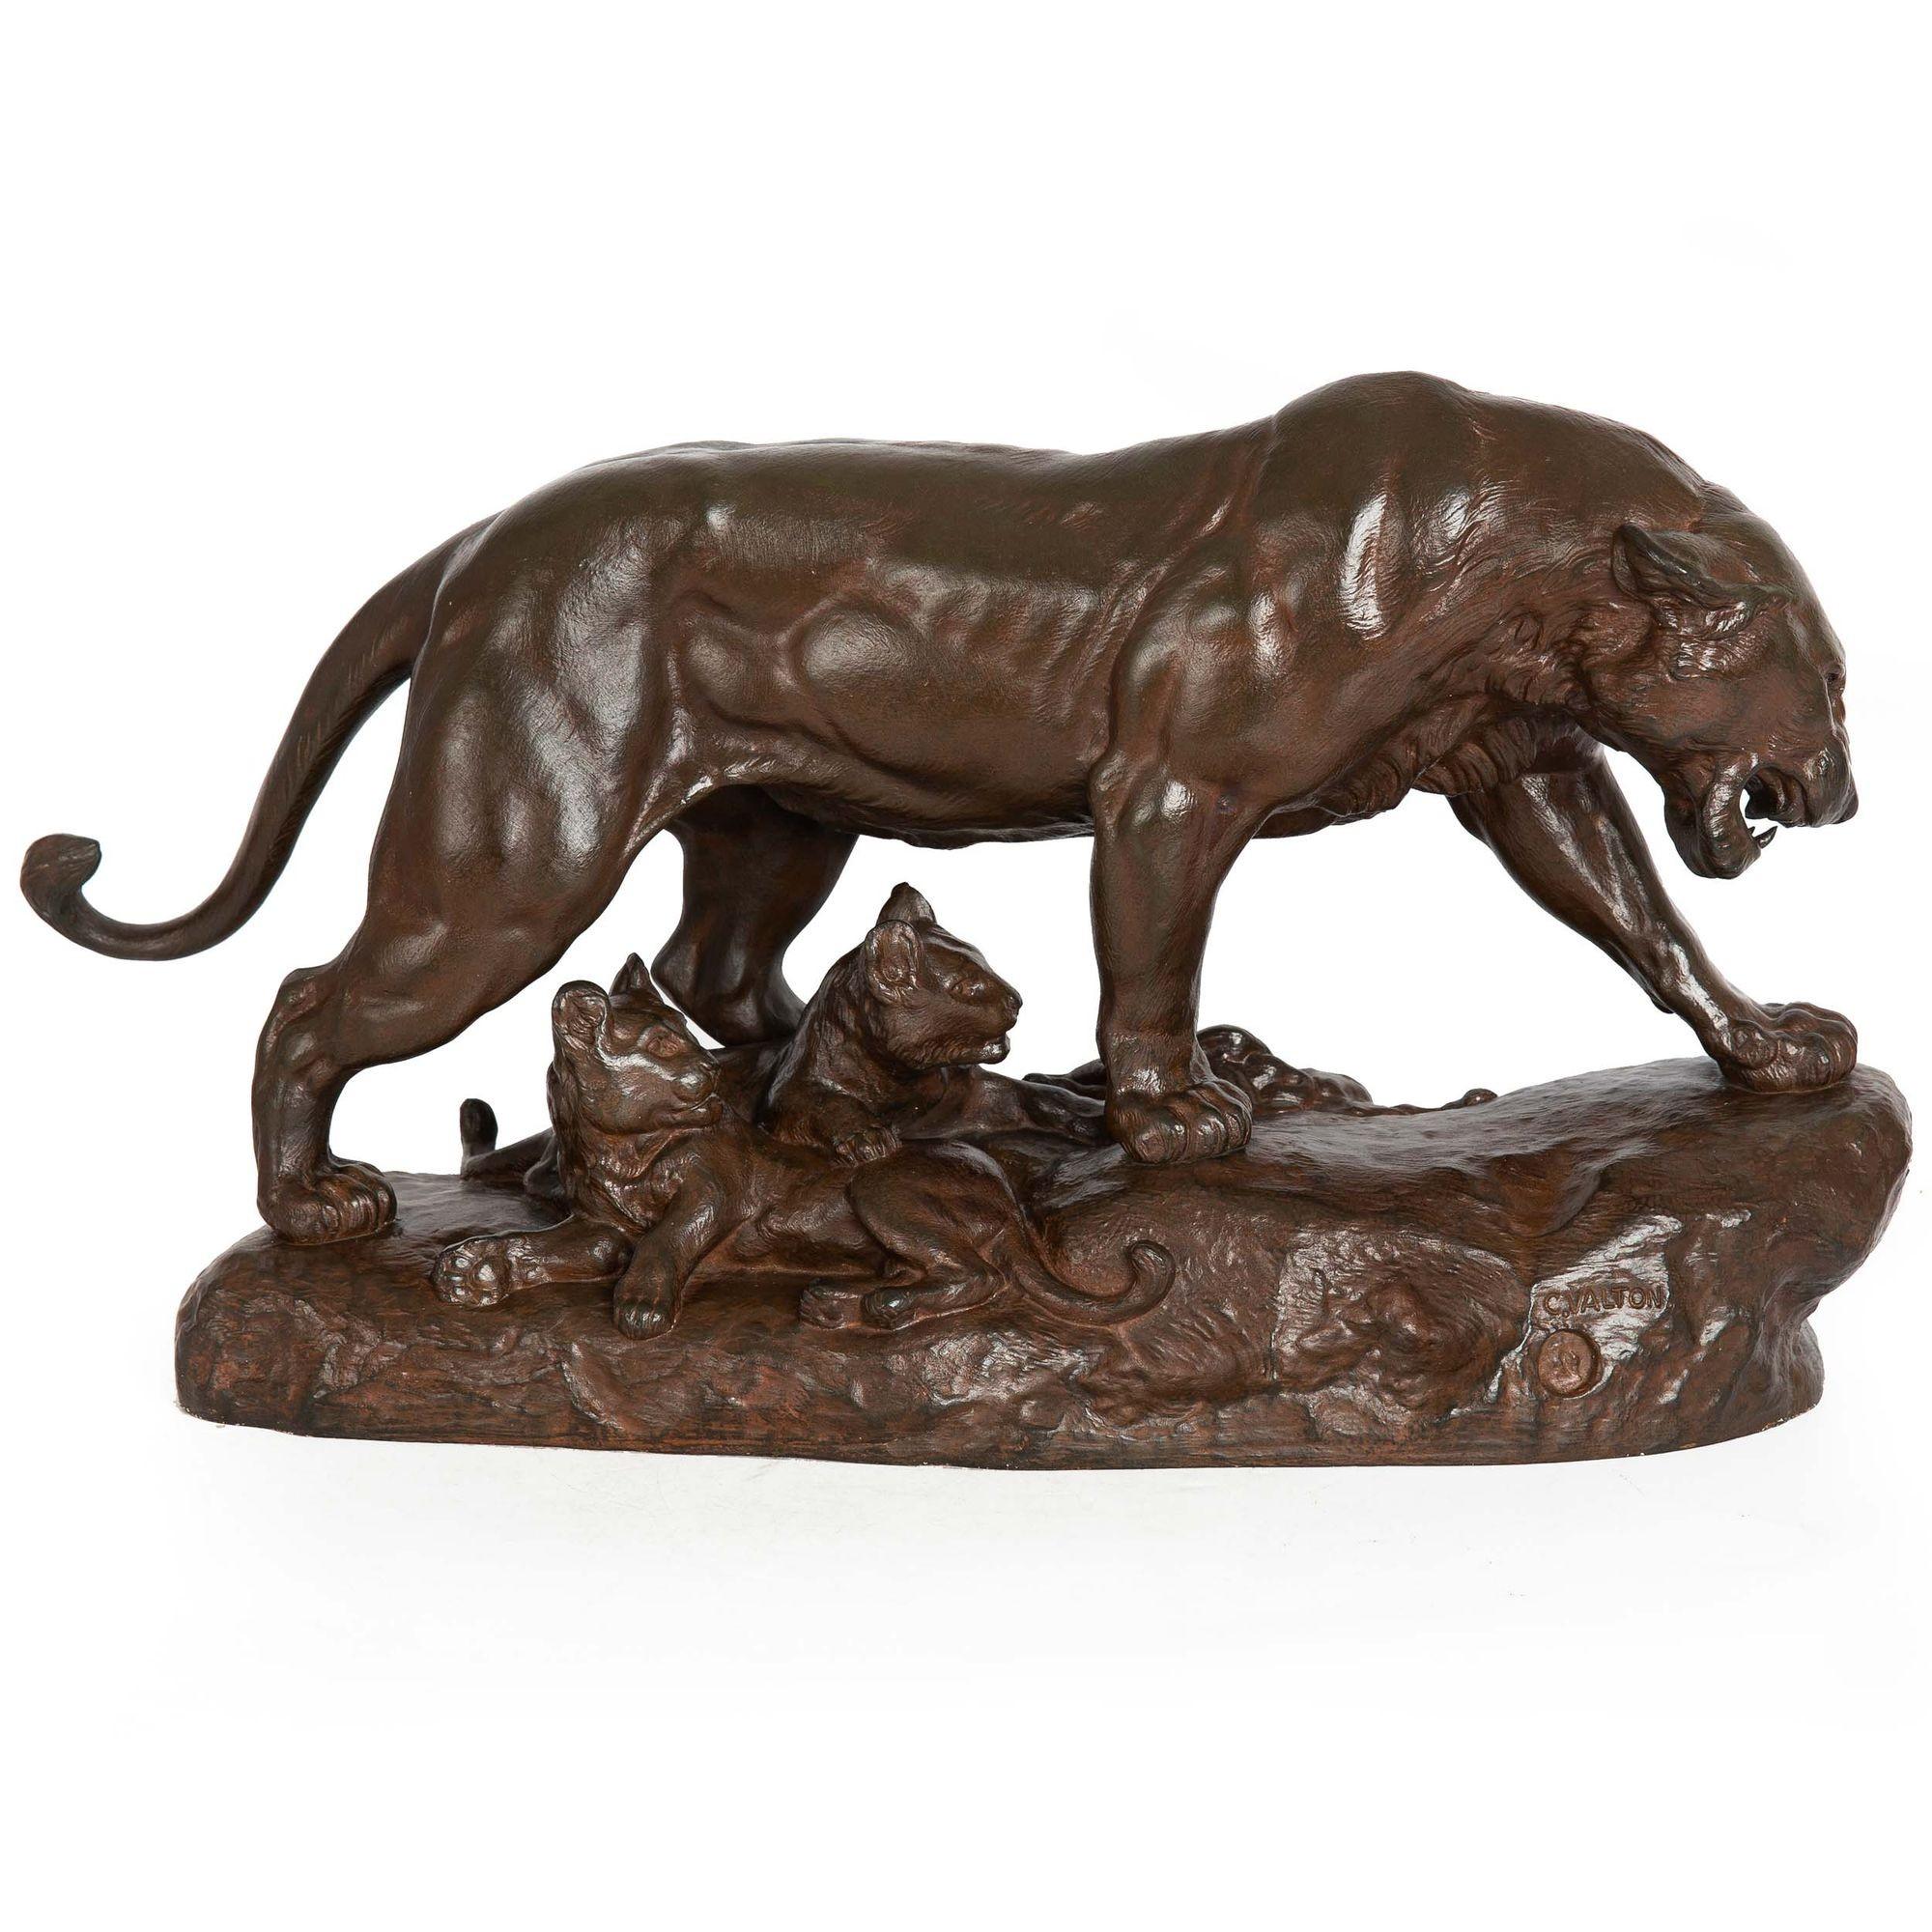 CHARLES VALTON
French, 1851-1913

Lioness and Two Cubs

Reddish-brown patinated bronze  Signed 